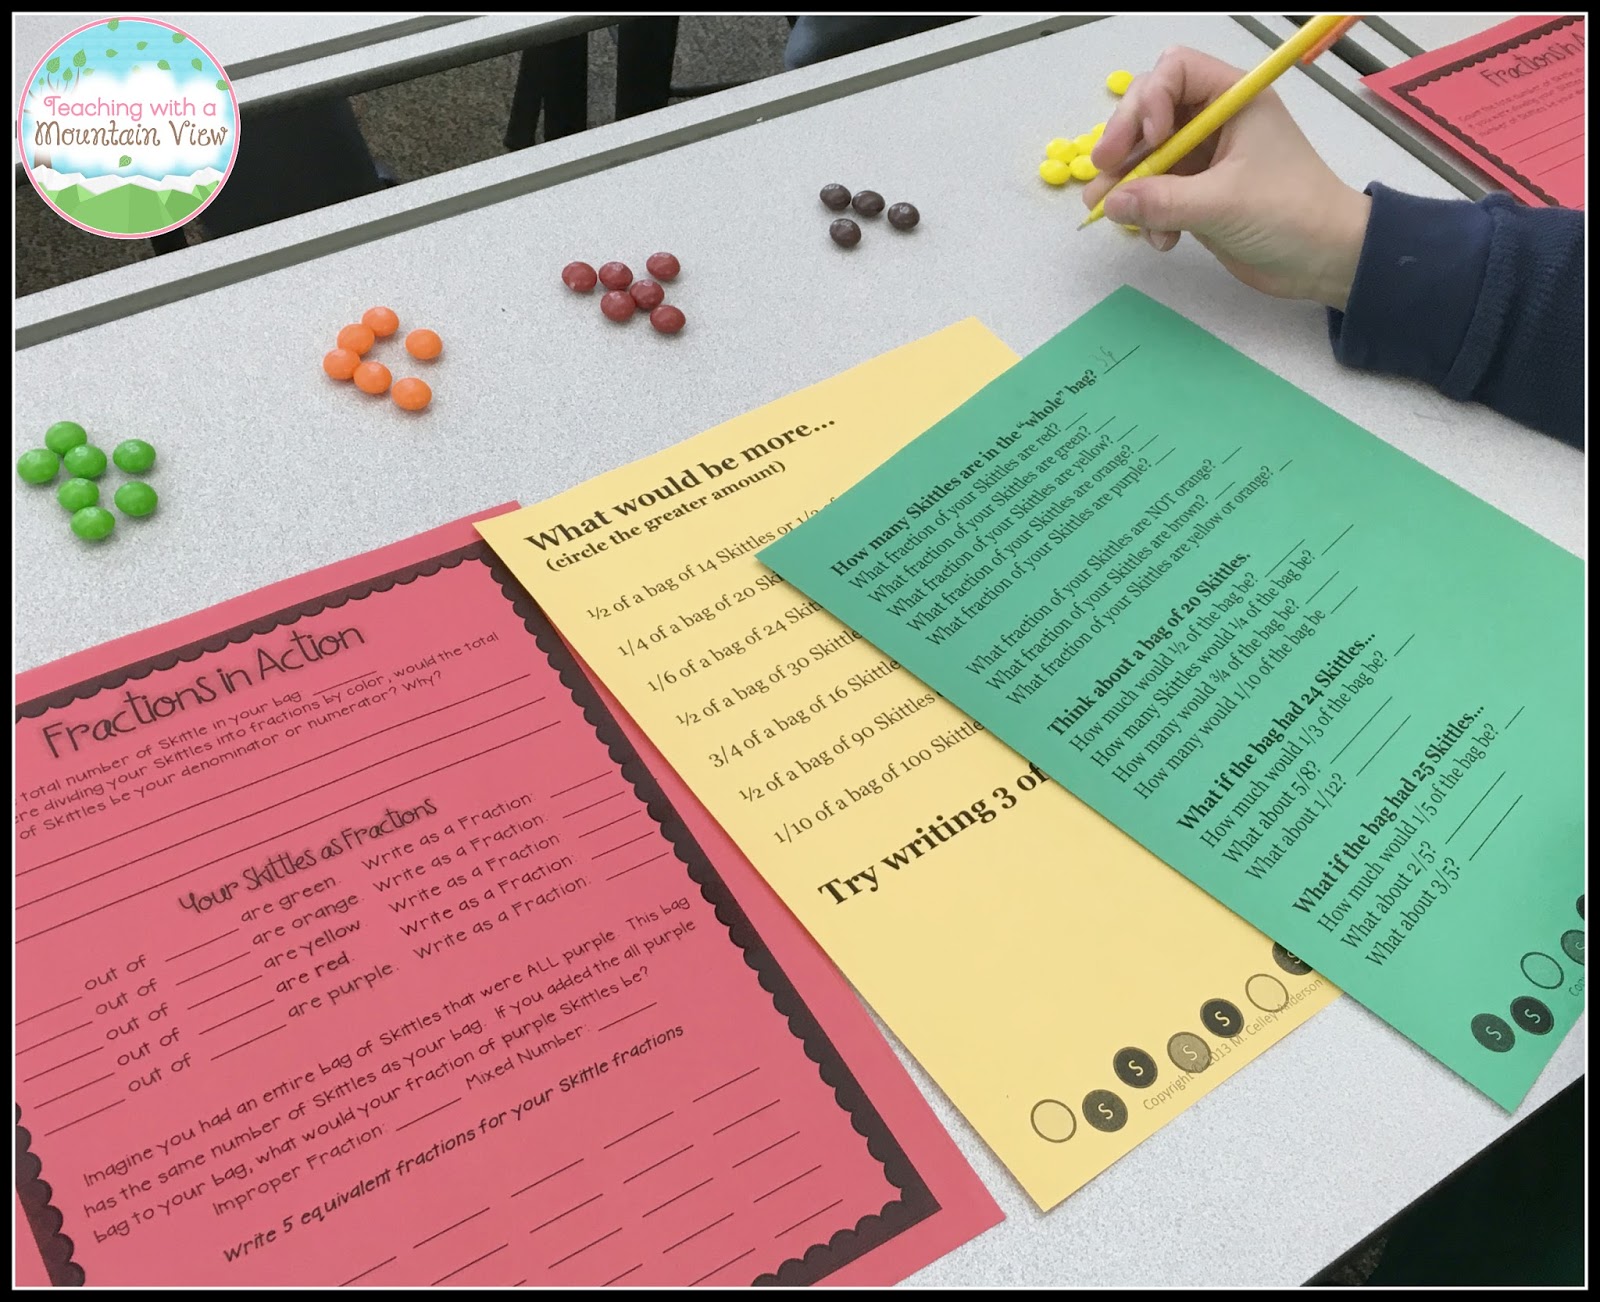 Upper elementary fraction unit activities for hands-on learning. Includes practice activities, exit tickets, math projects, and more!